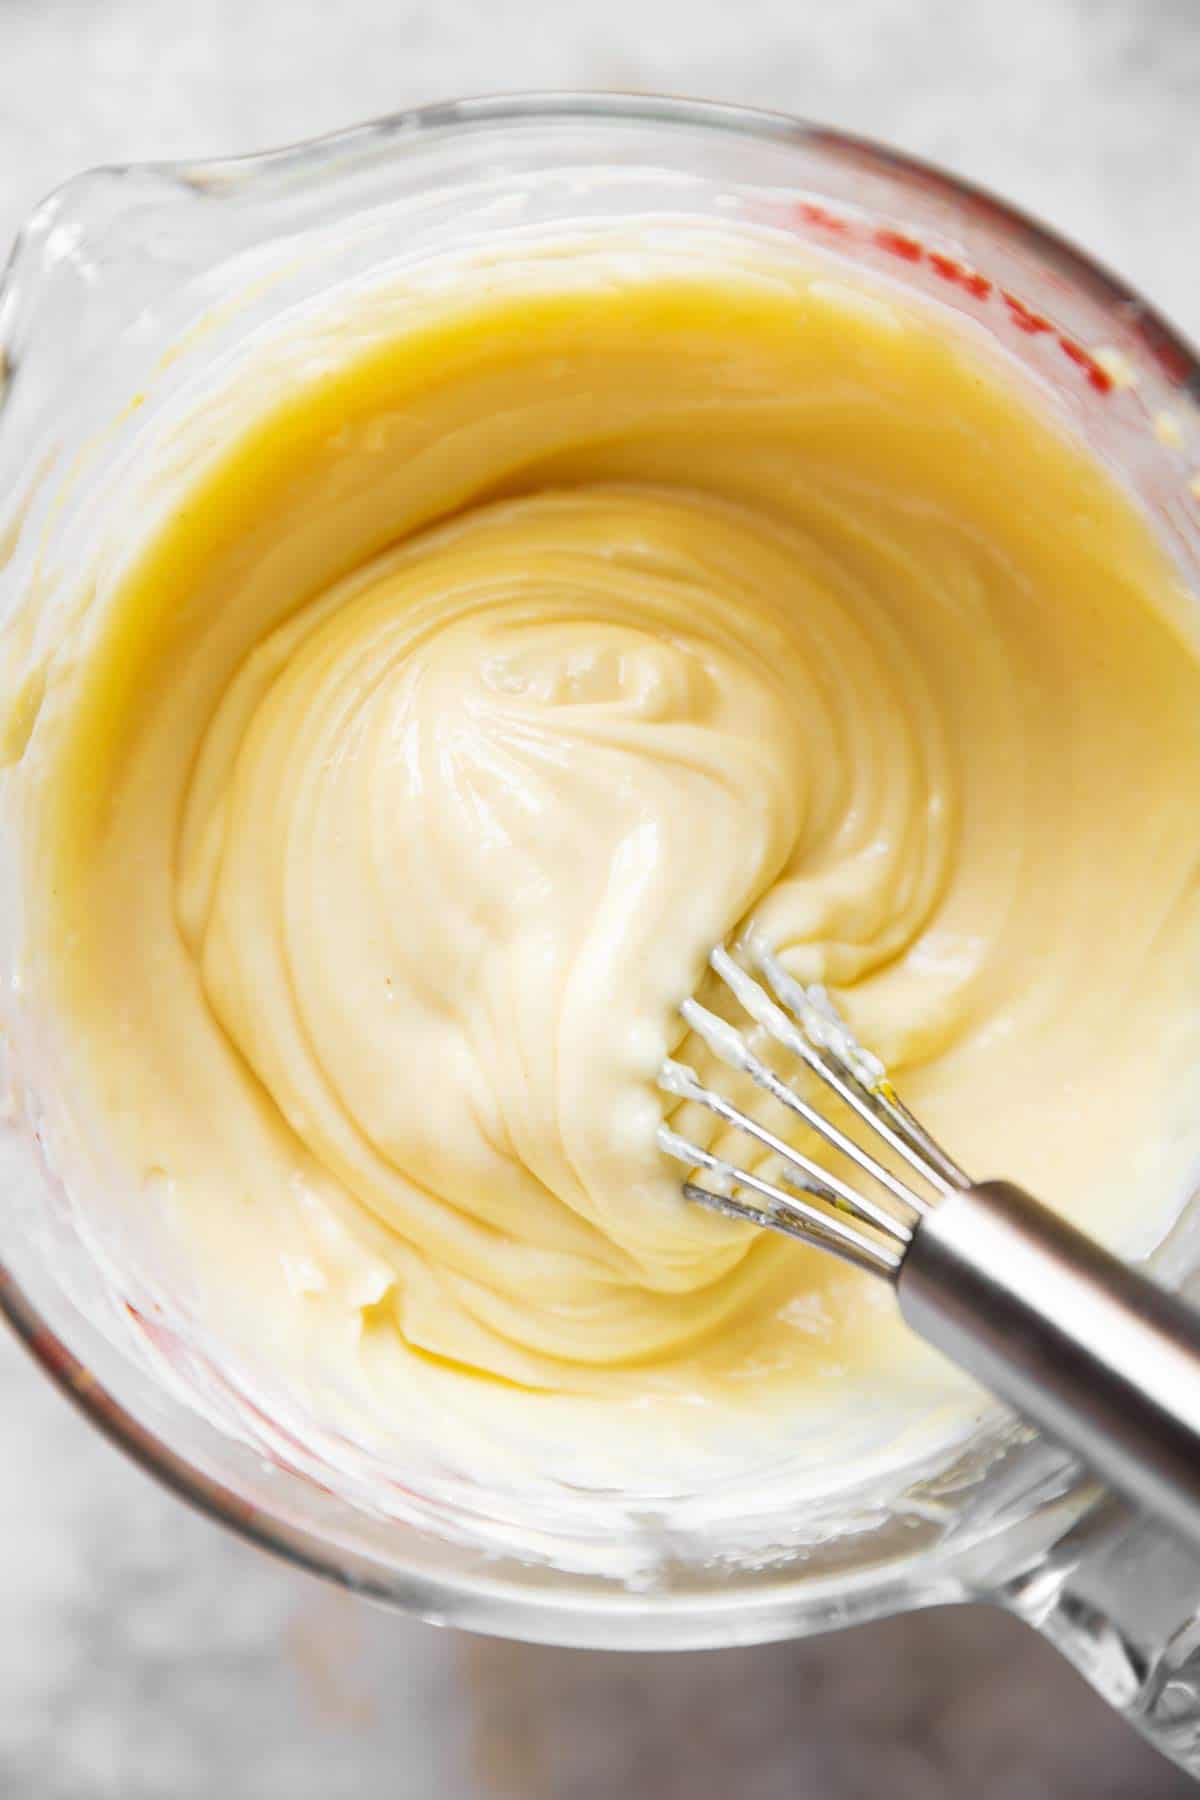 https://www.savorynothings.com/wp-content/uploads/2021/04/how-to-make-mayonnaise-image-1.jpg